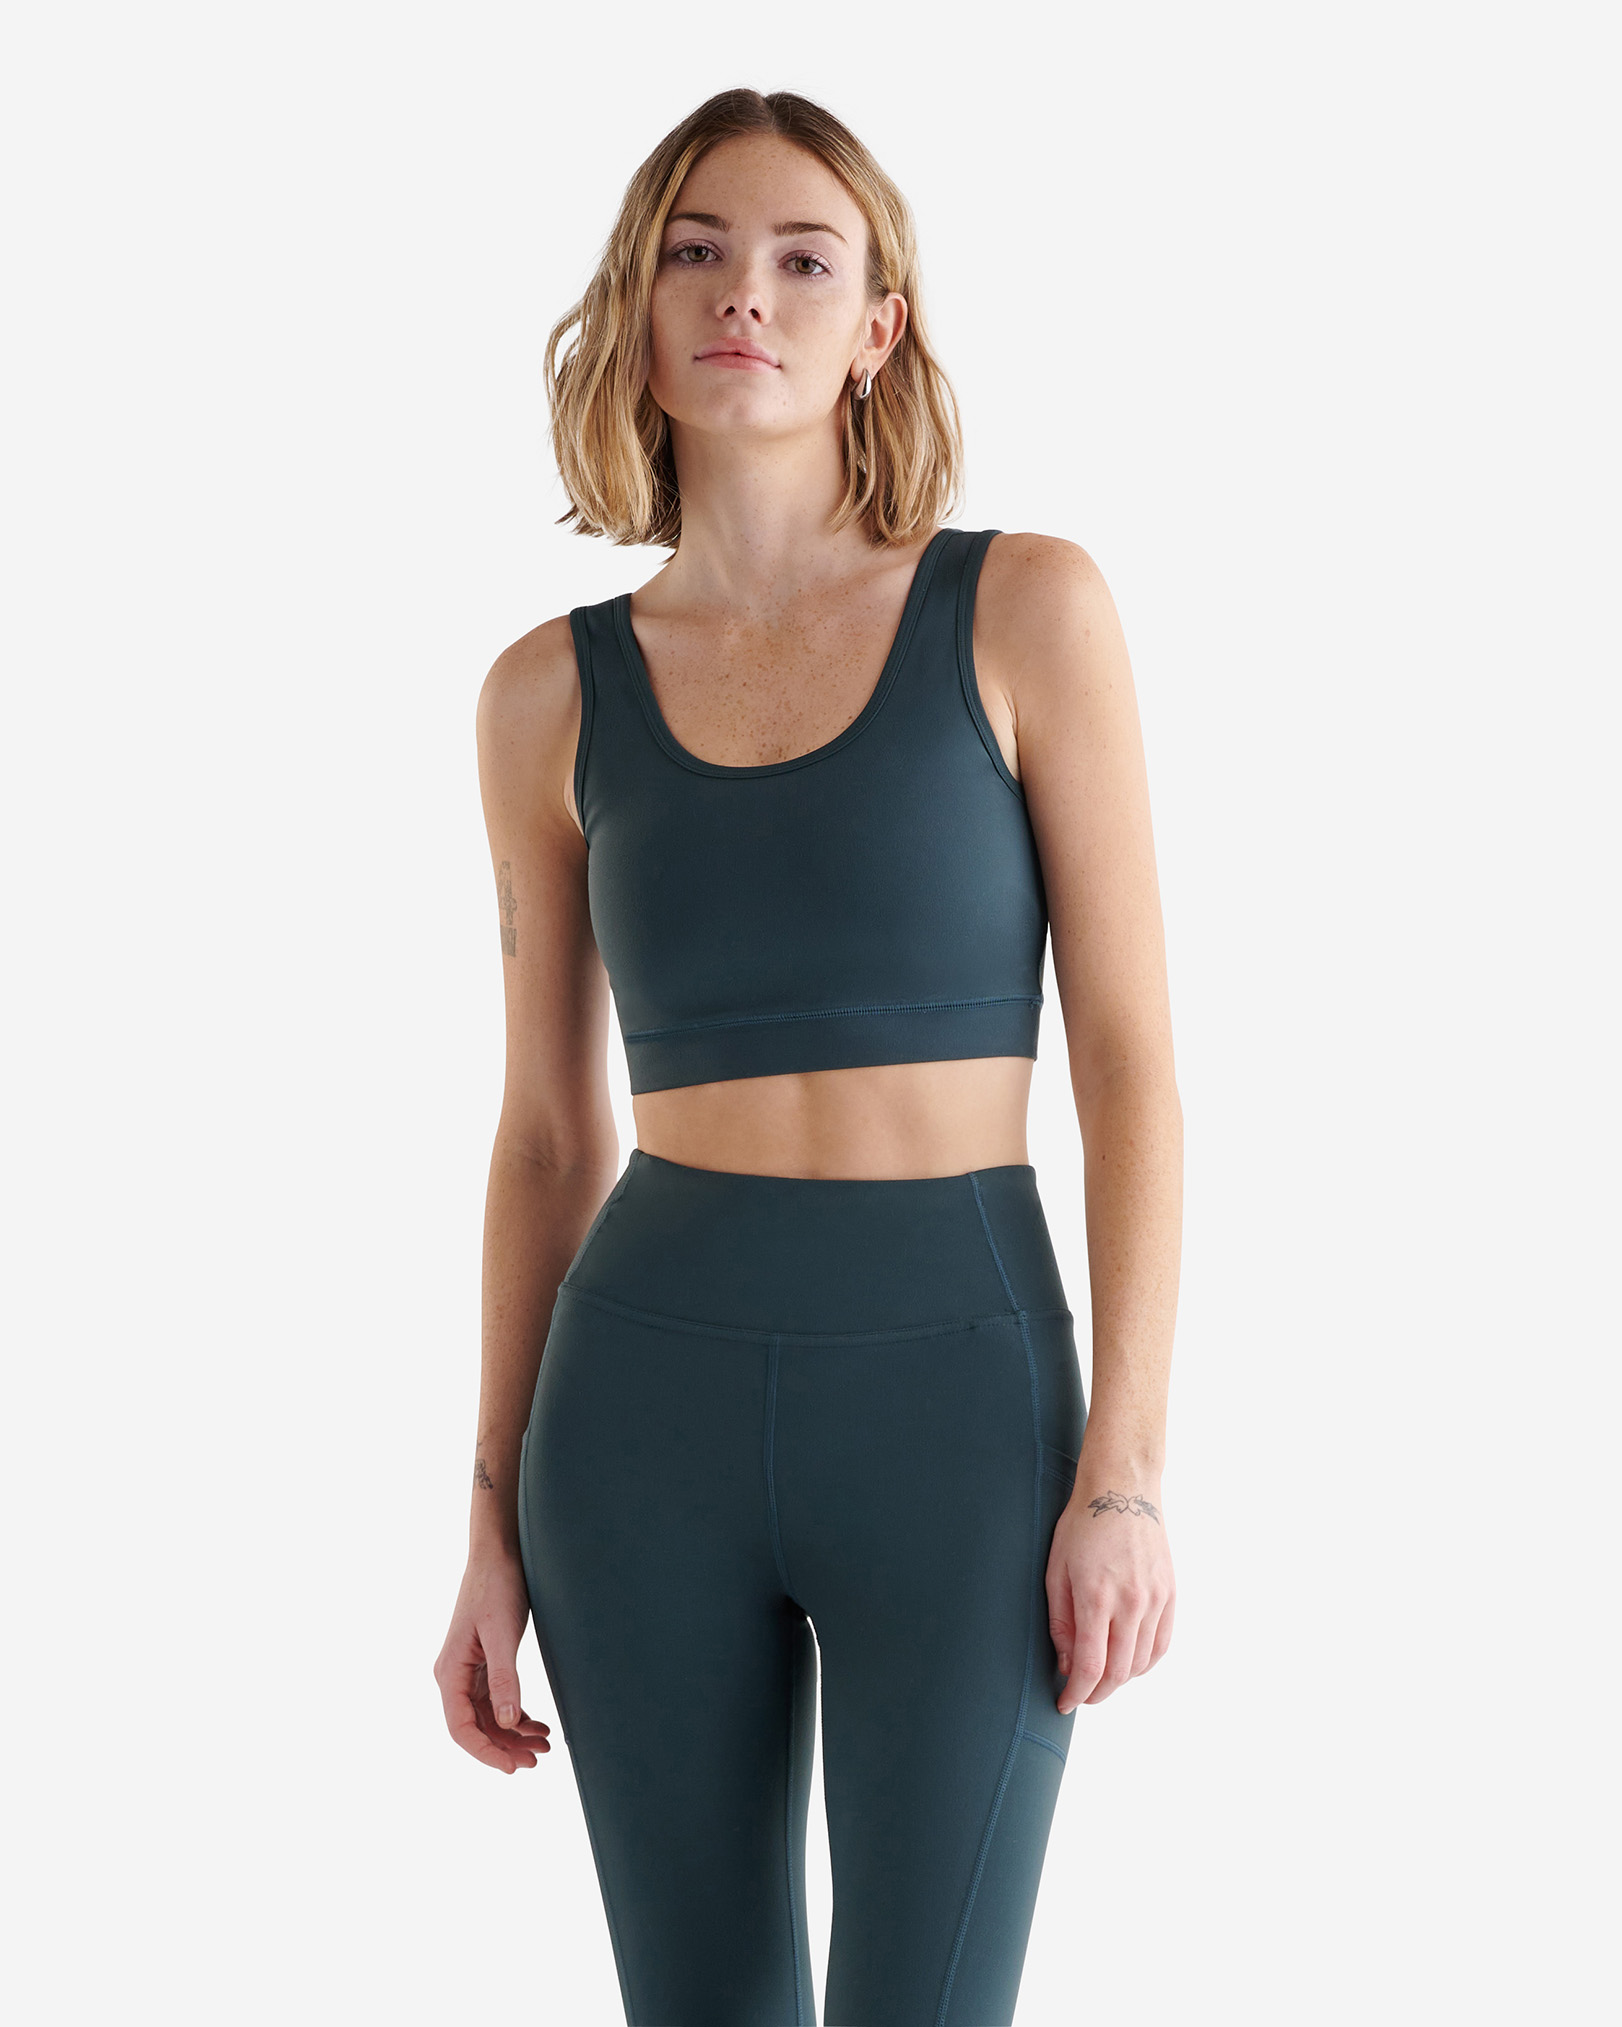 Roots Restore Crop Tank Top in Forest Teal